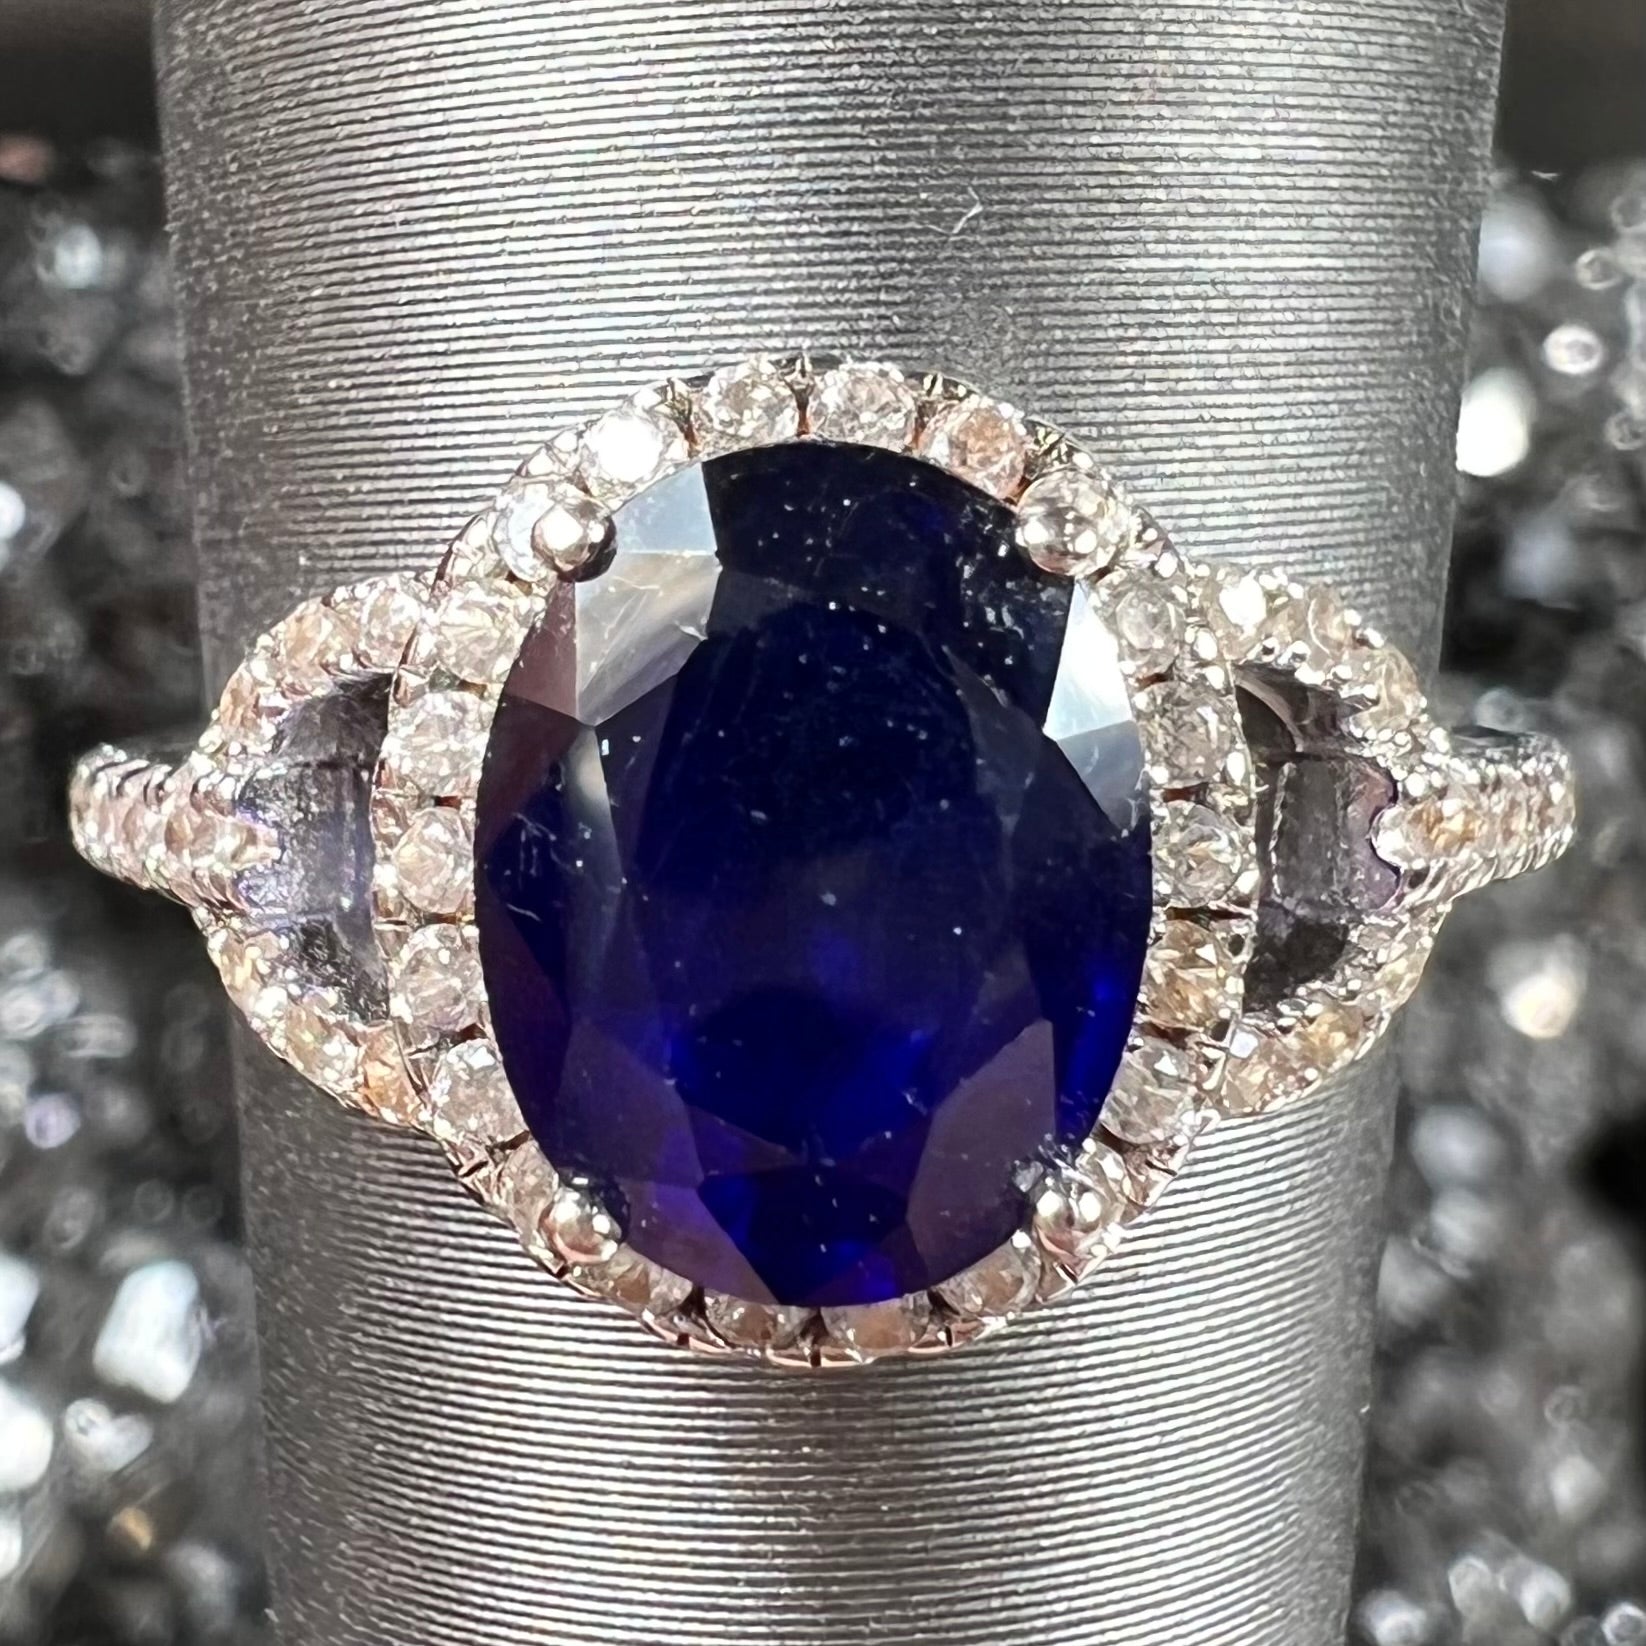 Guide for buying a blue sapphire ring: Steps to consider